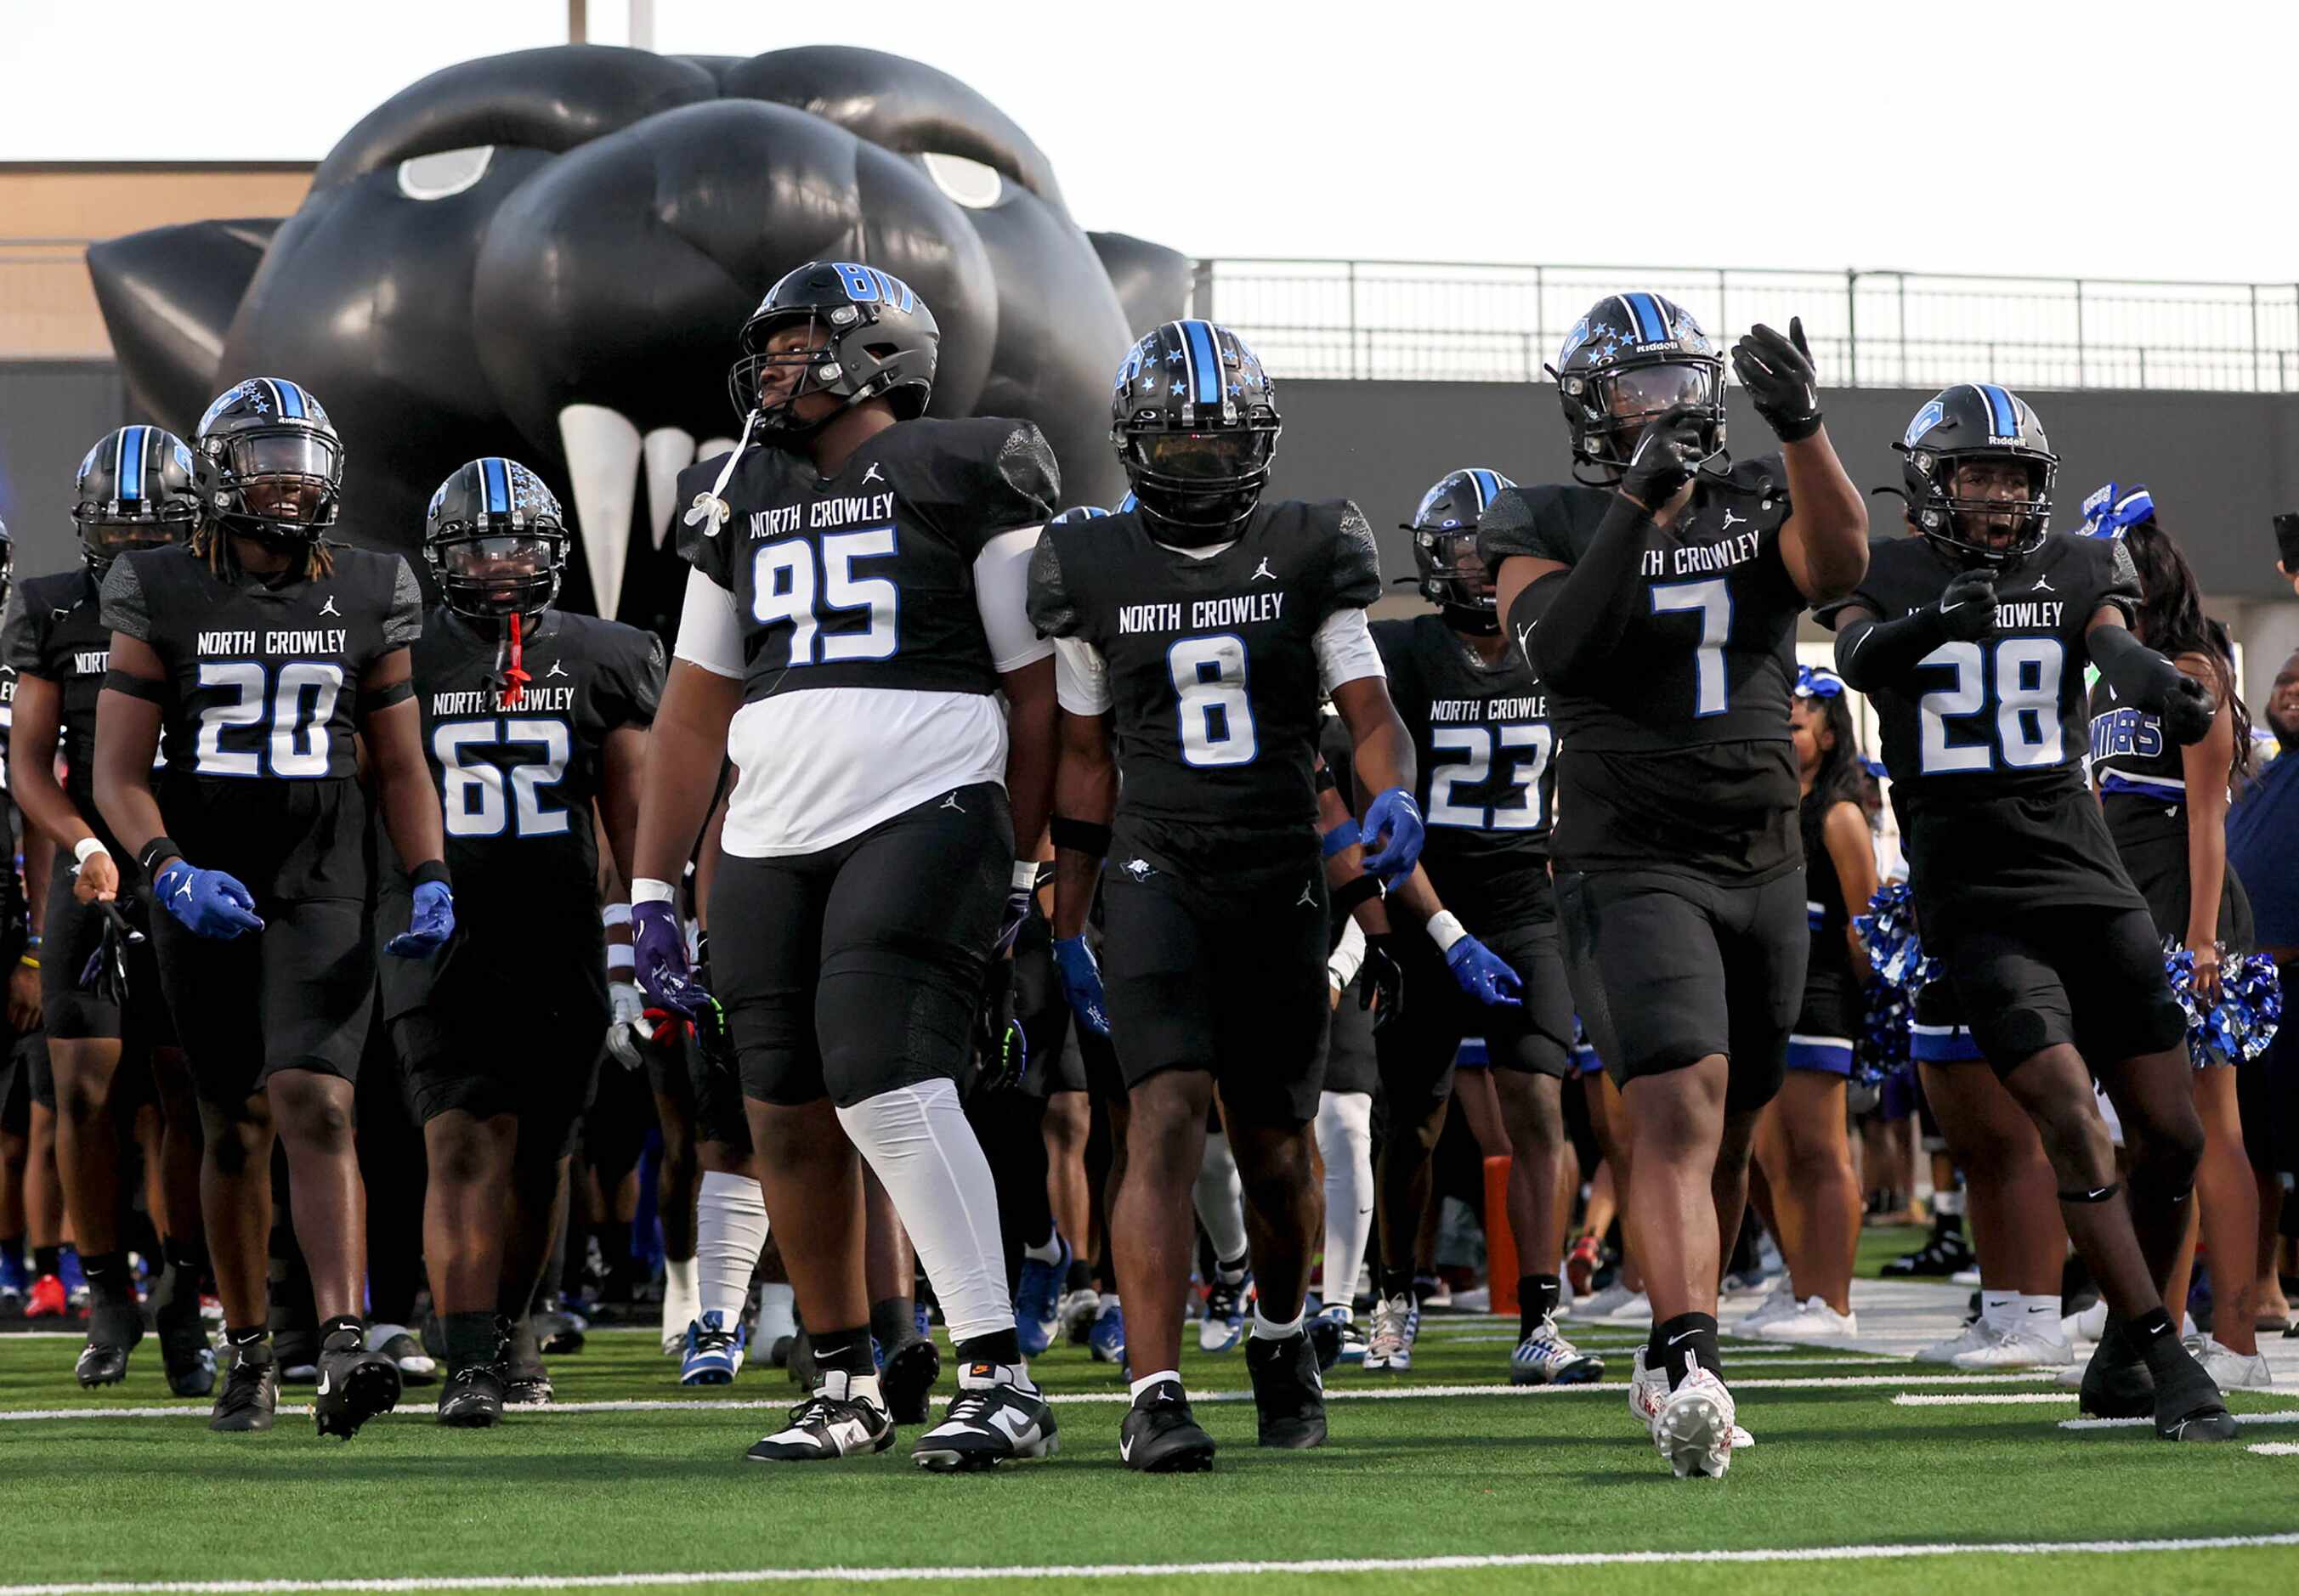 The North Crowley Panthers enter the field to face Euless Trinity in a high school football...